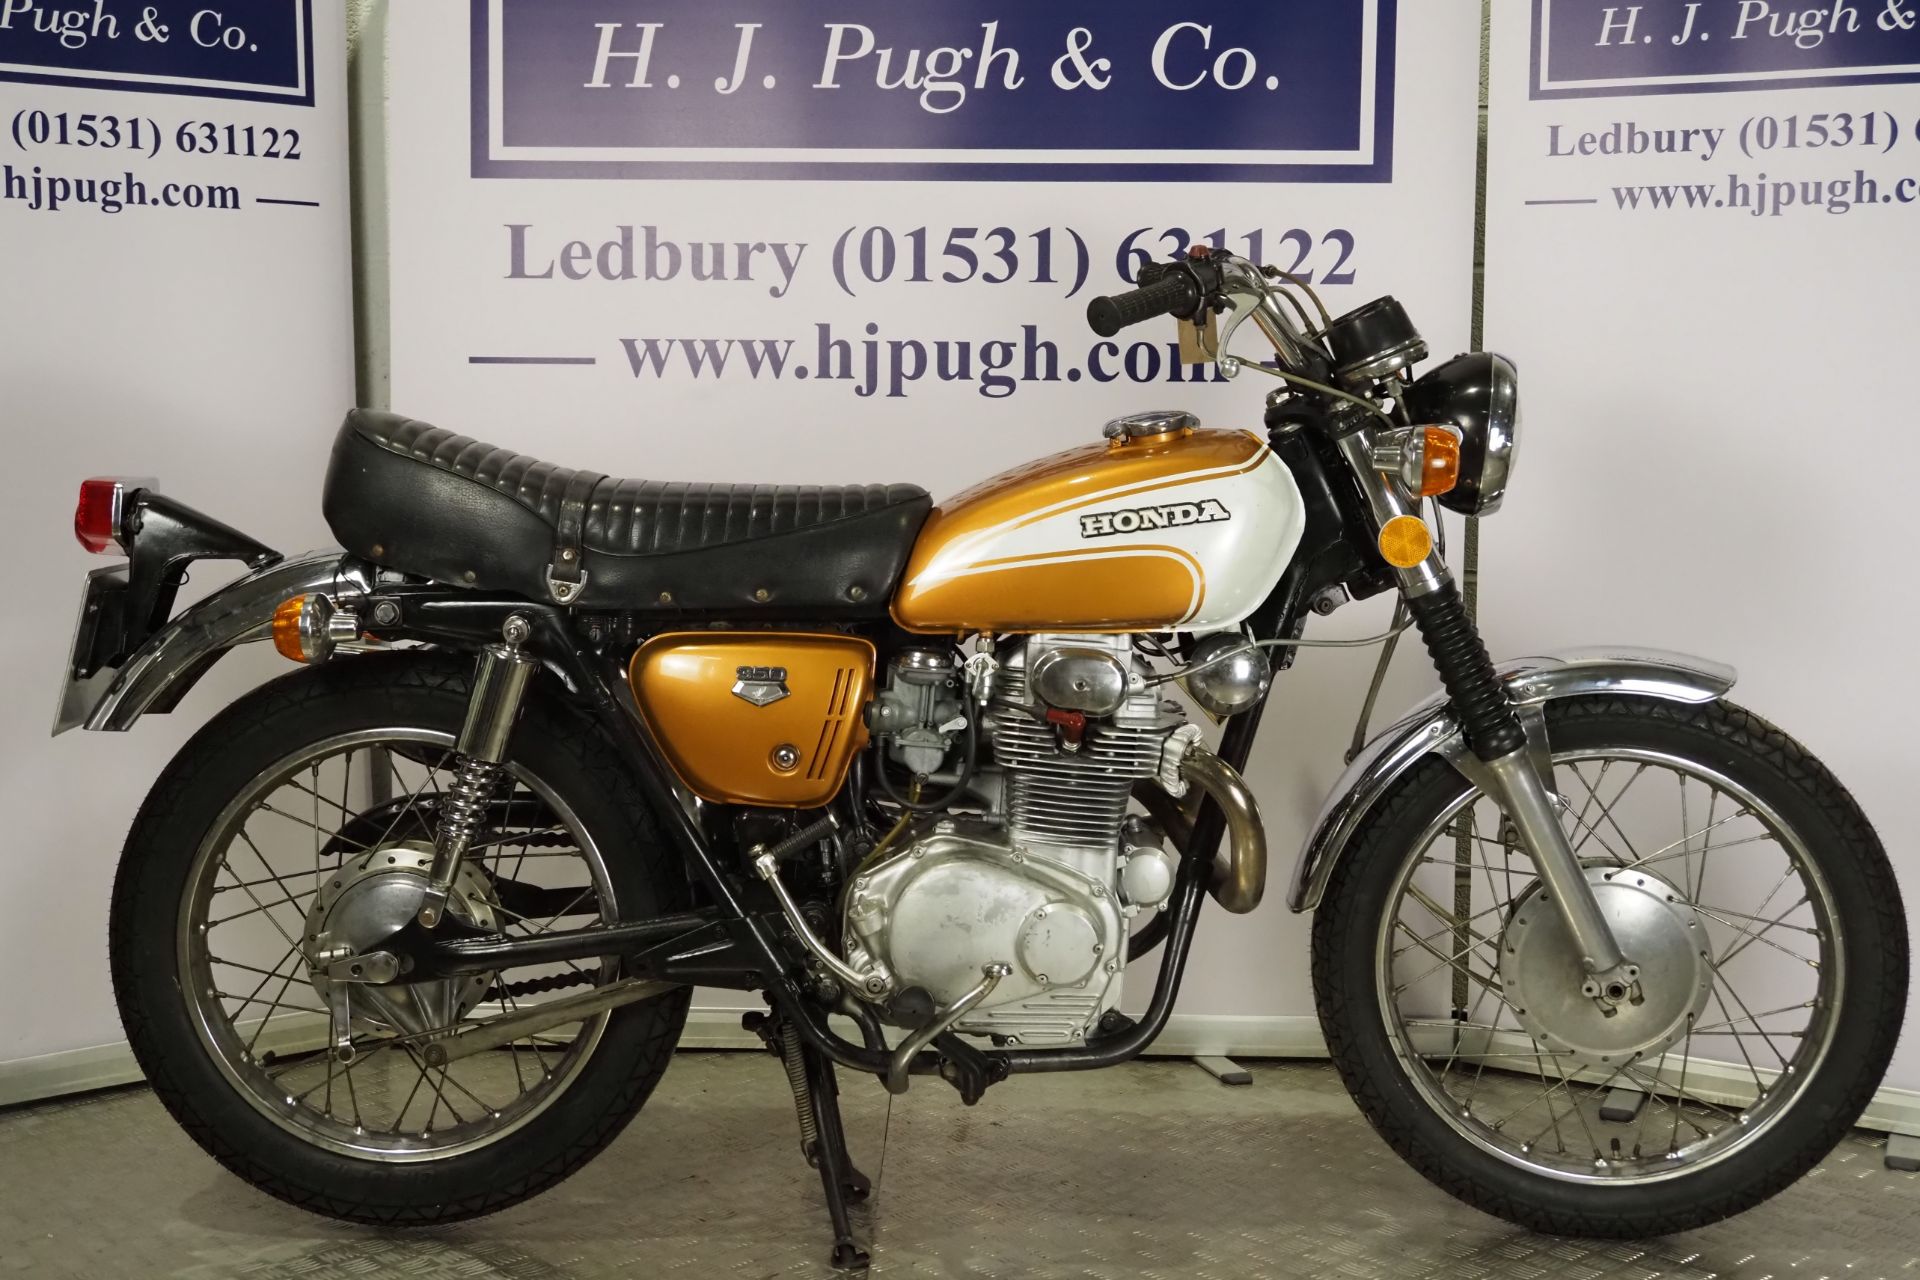 Honda CL350 motorcycle. 1971. 325ccRuns and rides. New tyres and tubes, new battery, carburettors